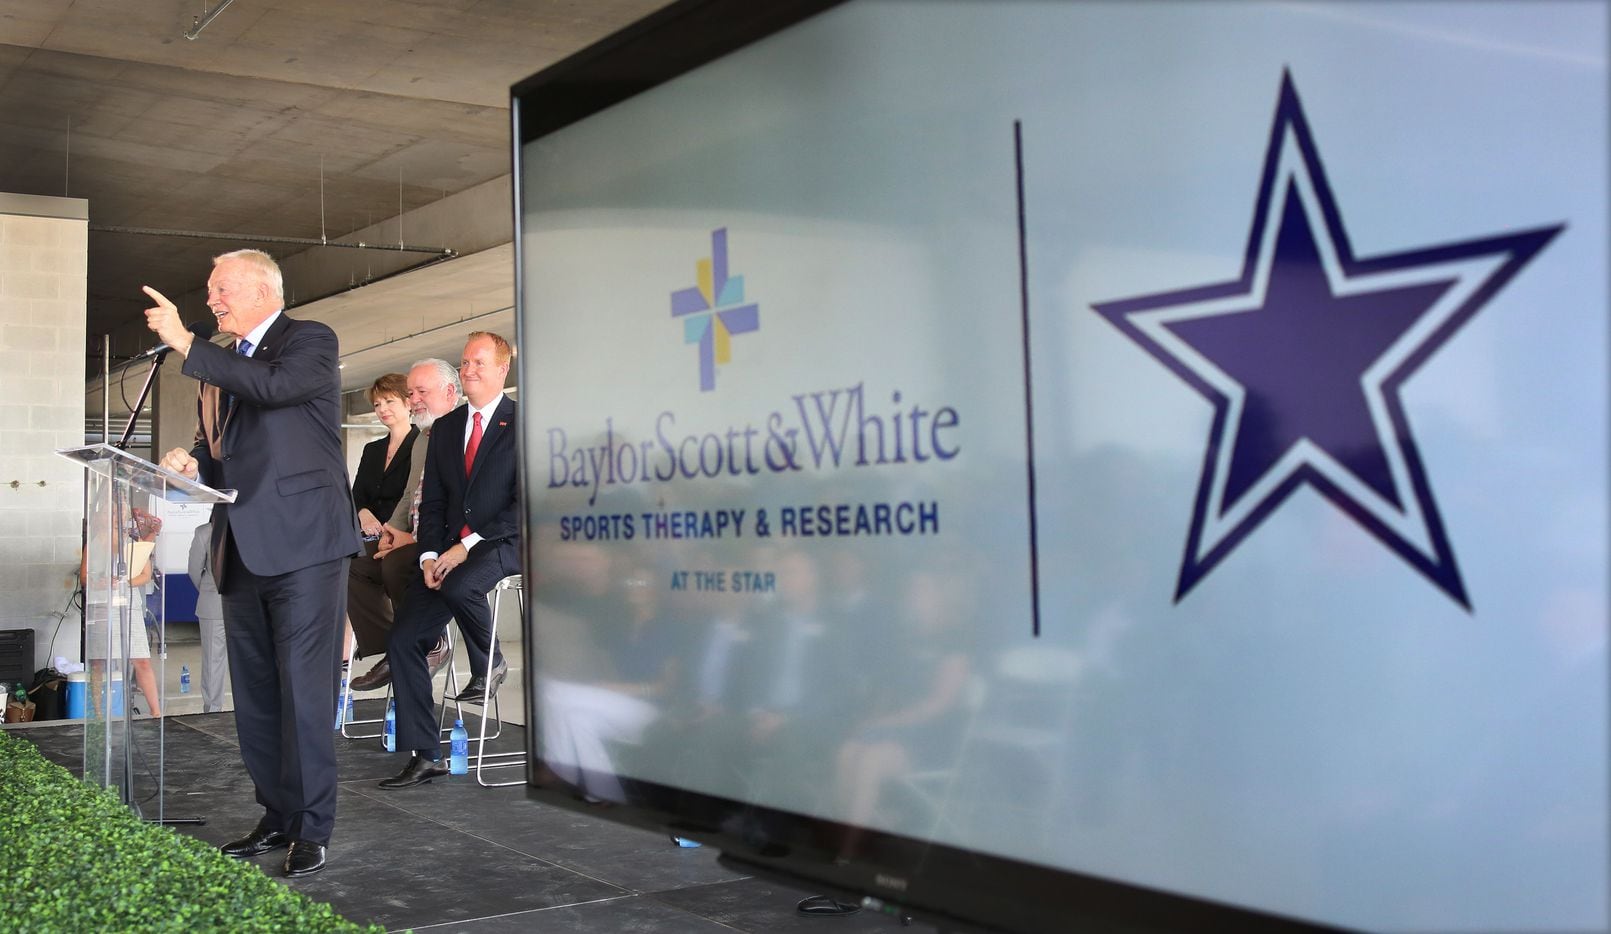 Dallas Cowboys owner Jerry Jones talks during a ceremony to celebrate the topping off of the Baylor Scott & White Sports Therapy & Research building under construction at The Star in Frisco on July 18, 2017.